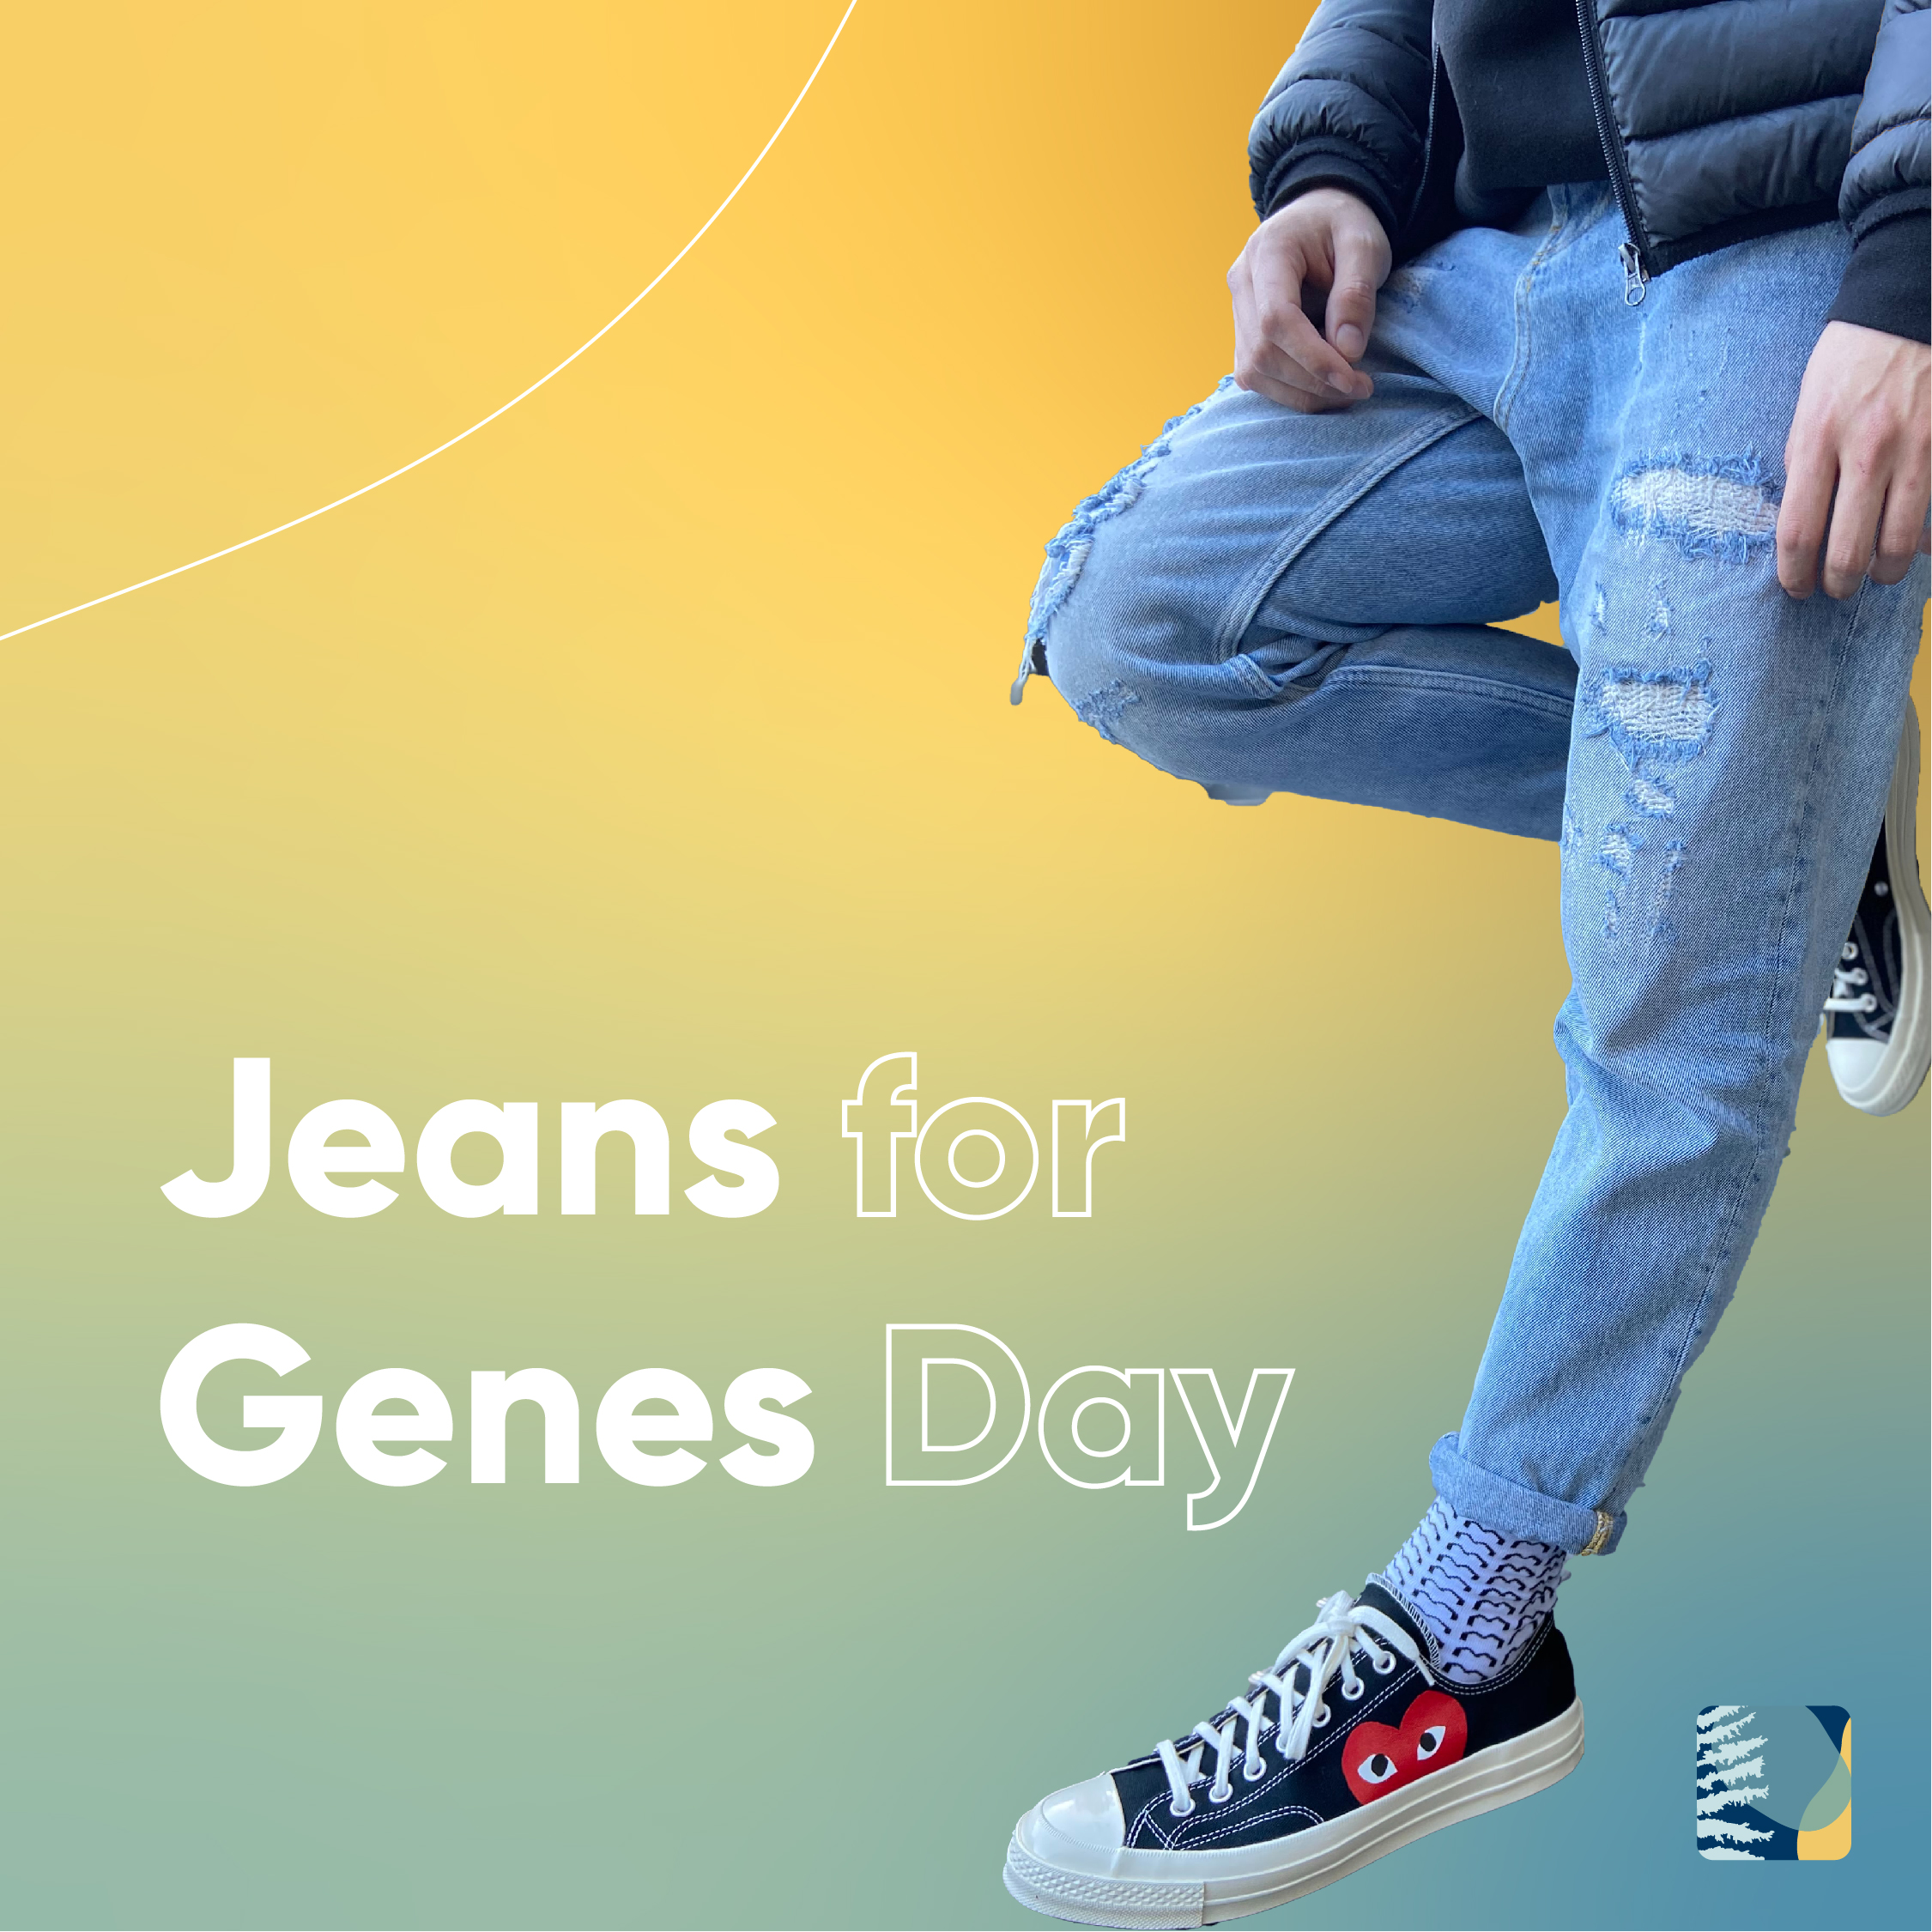 Jeans for Genes Day South Steyne Manly Medical Centre